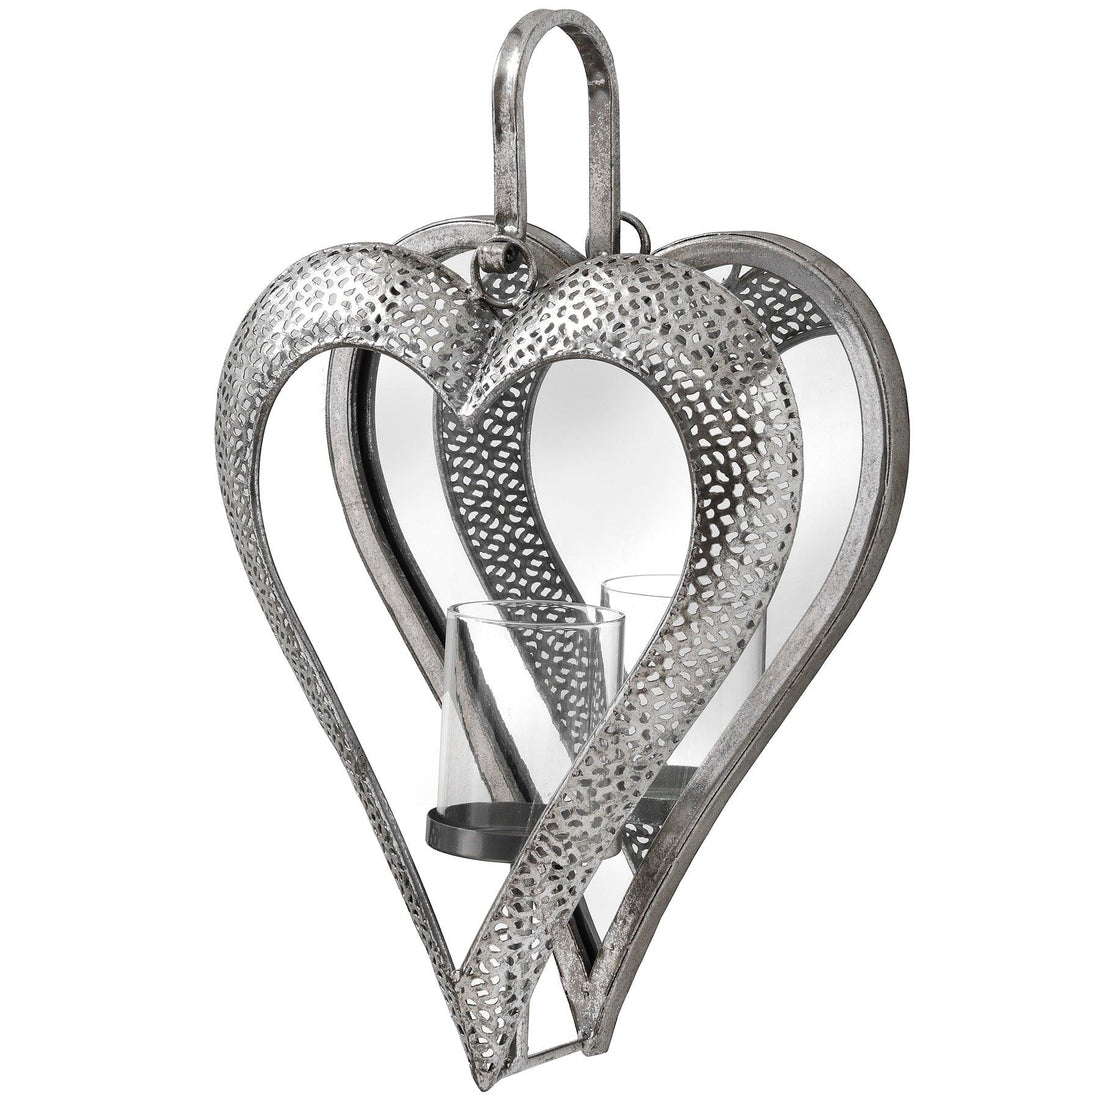 Antique Silver Heart Mirrored Tealight Holder in Small - £59.95 - Gifts & Accessories > Candle Holders > Candle Holders 